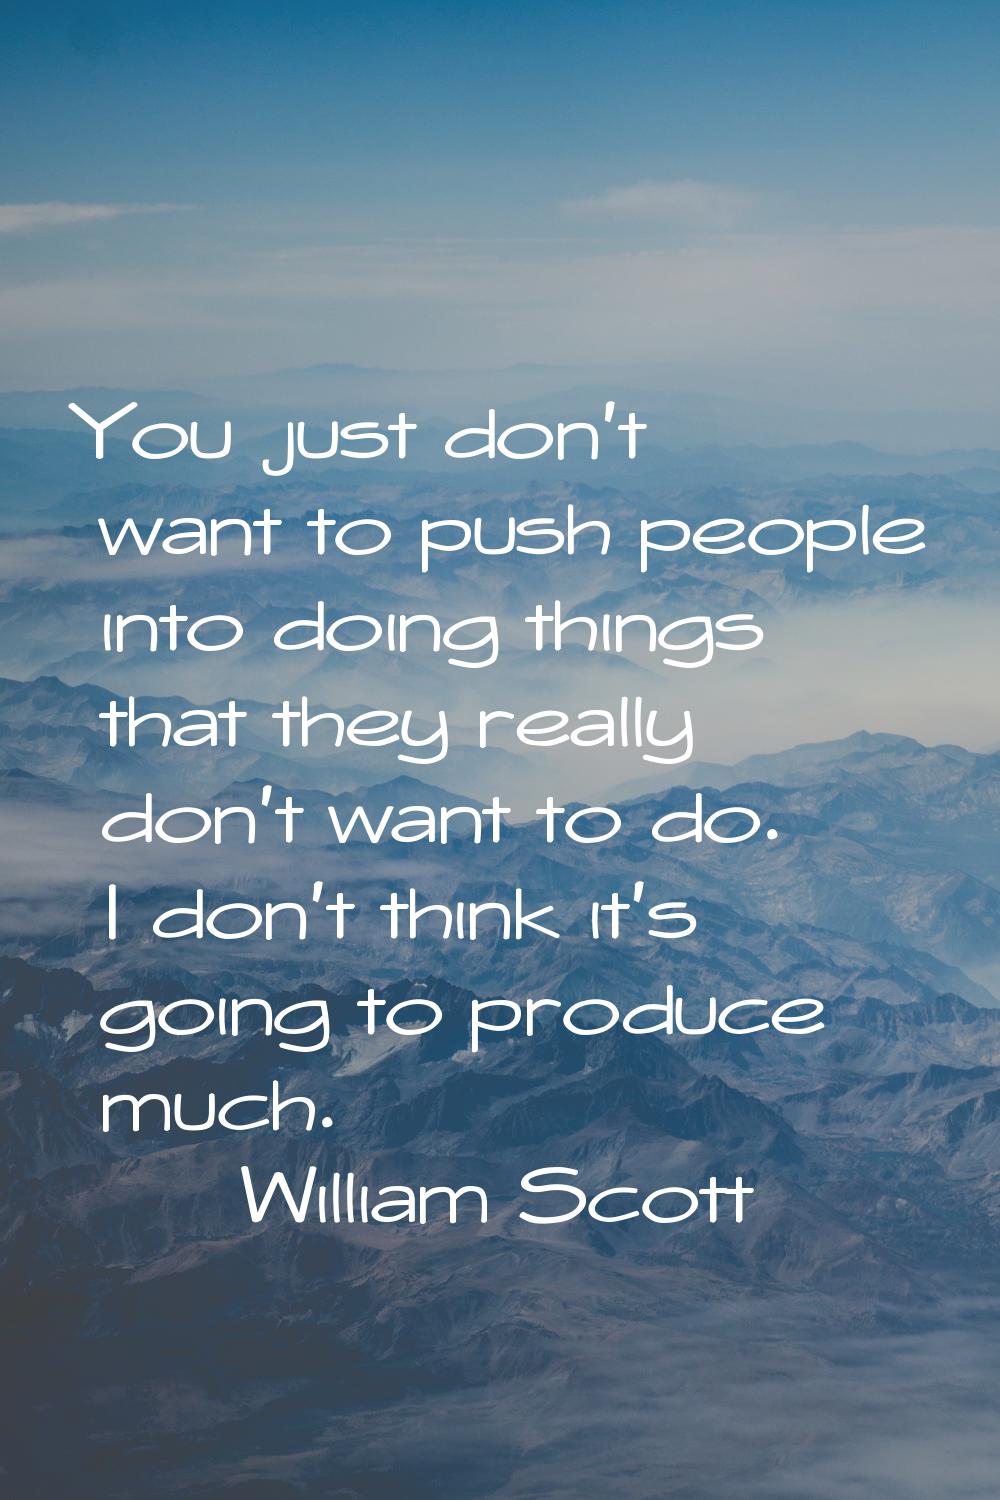 You just don't want to push people into doing things that they really don't want to do. I don't thi